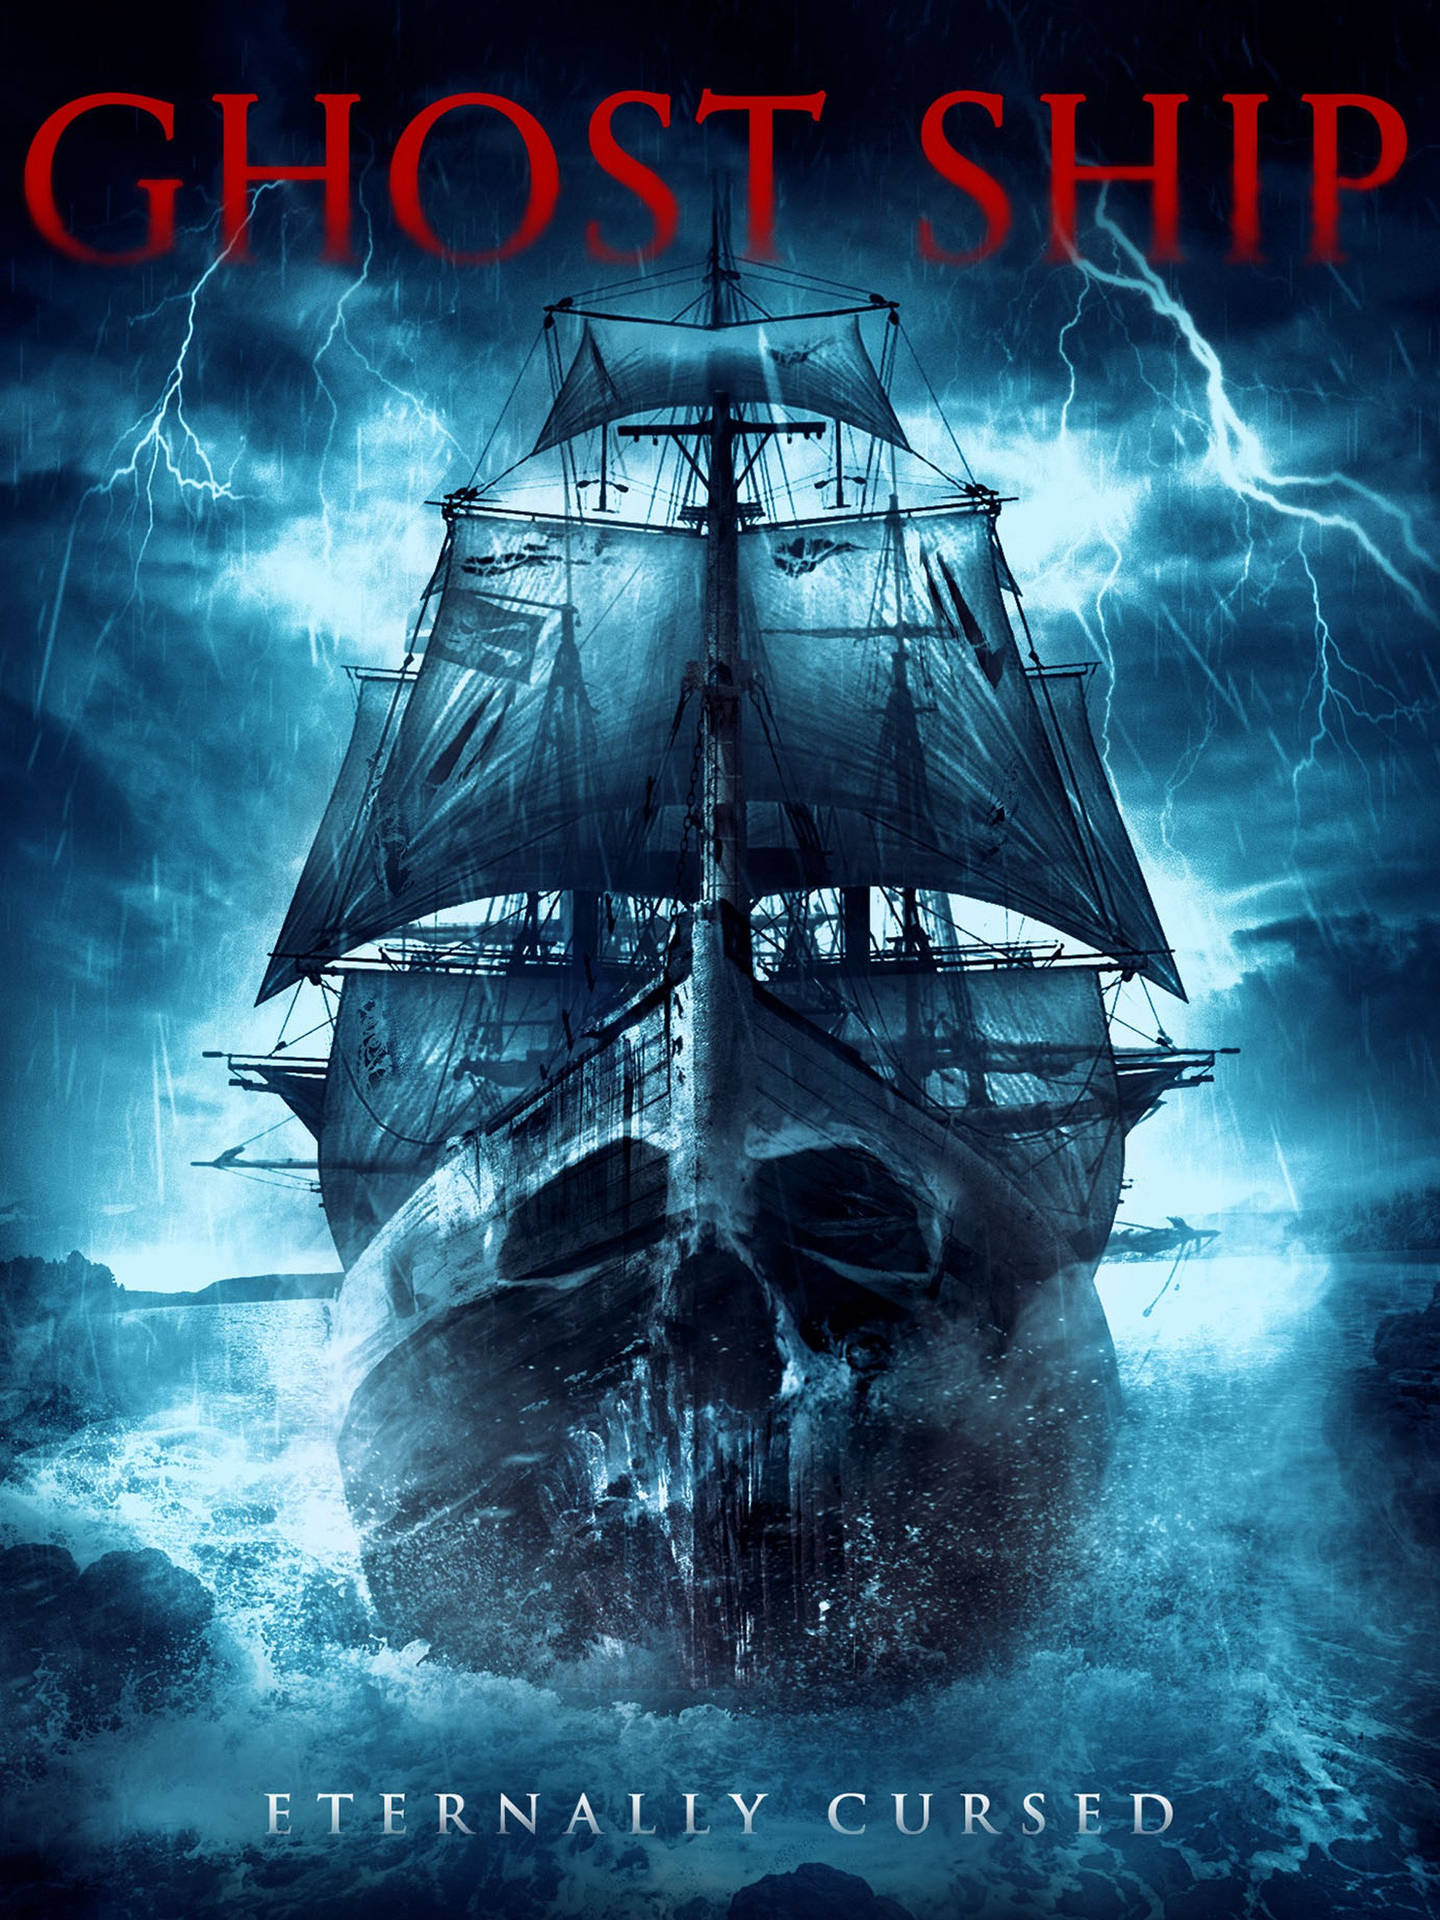 Ghost Ship Movie Poster Background